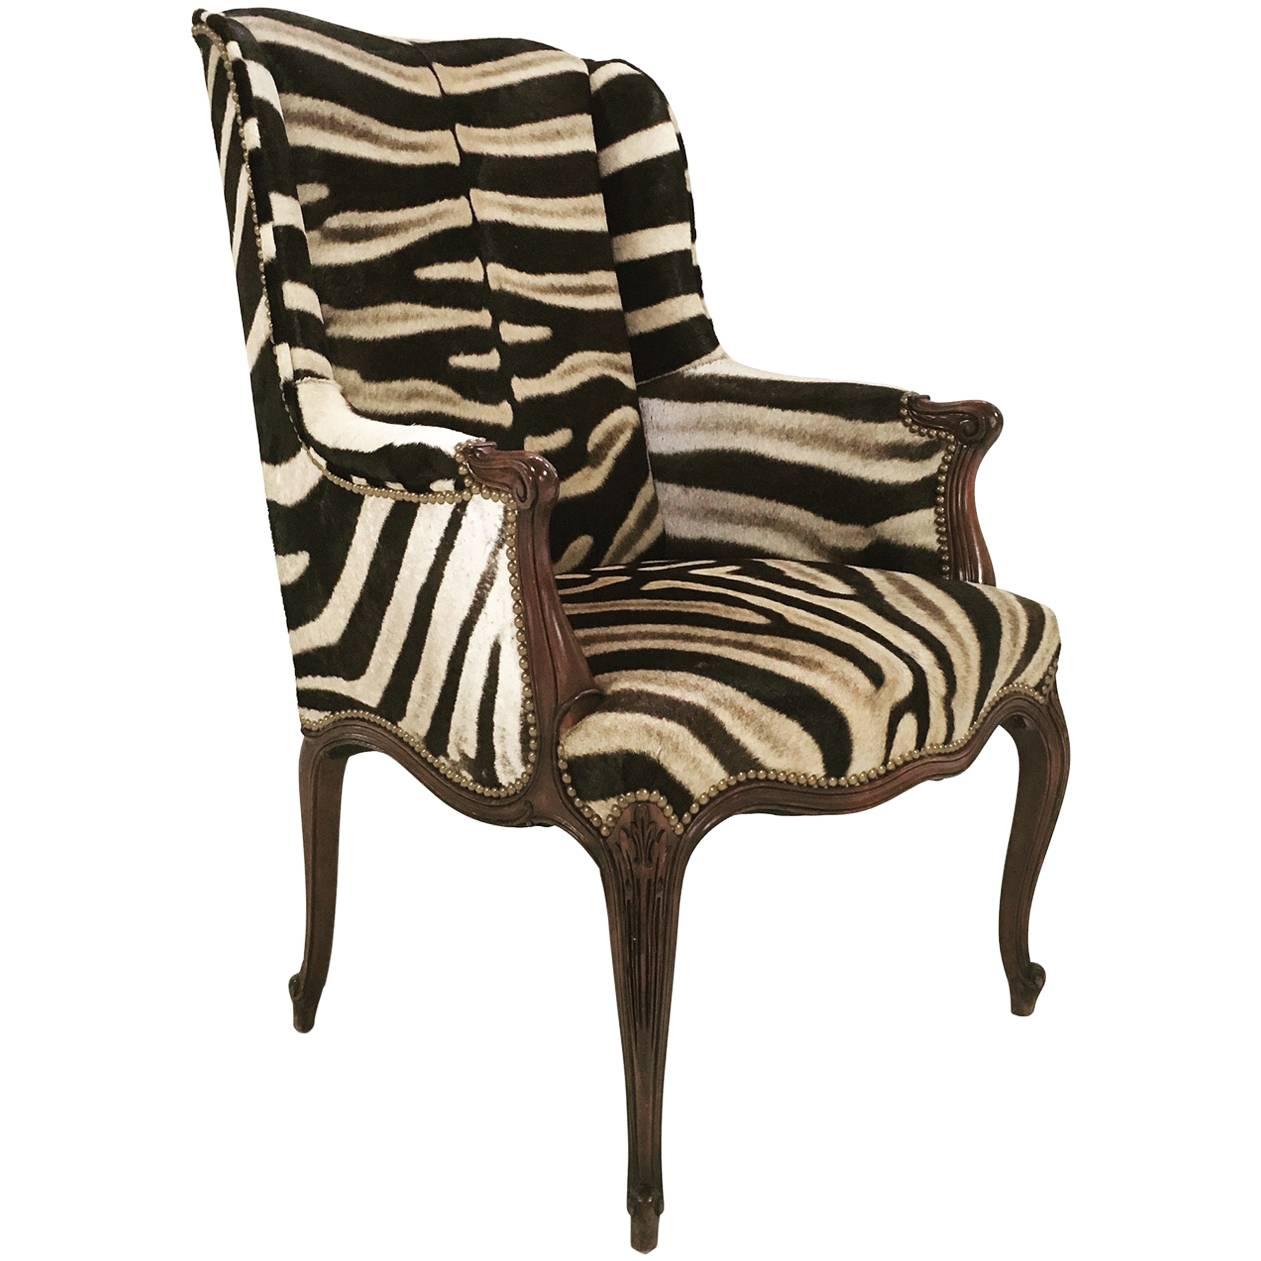 Vintage English Neoclassical Style Mahogany Wingback in Zebra